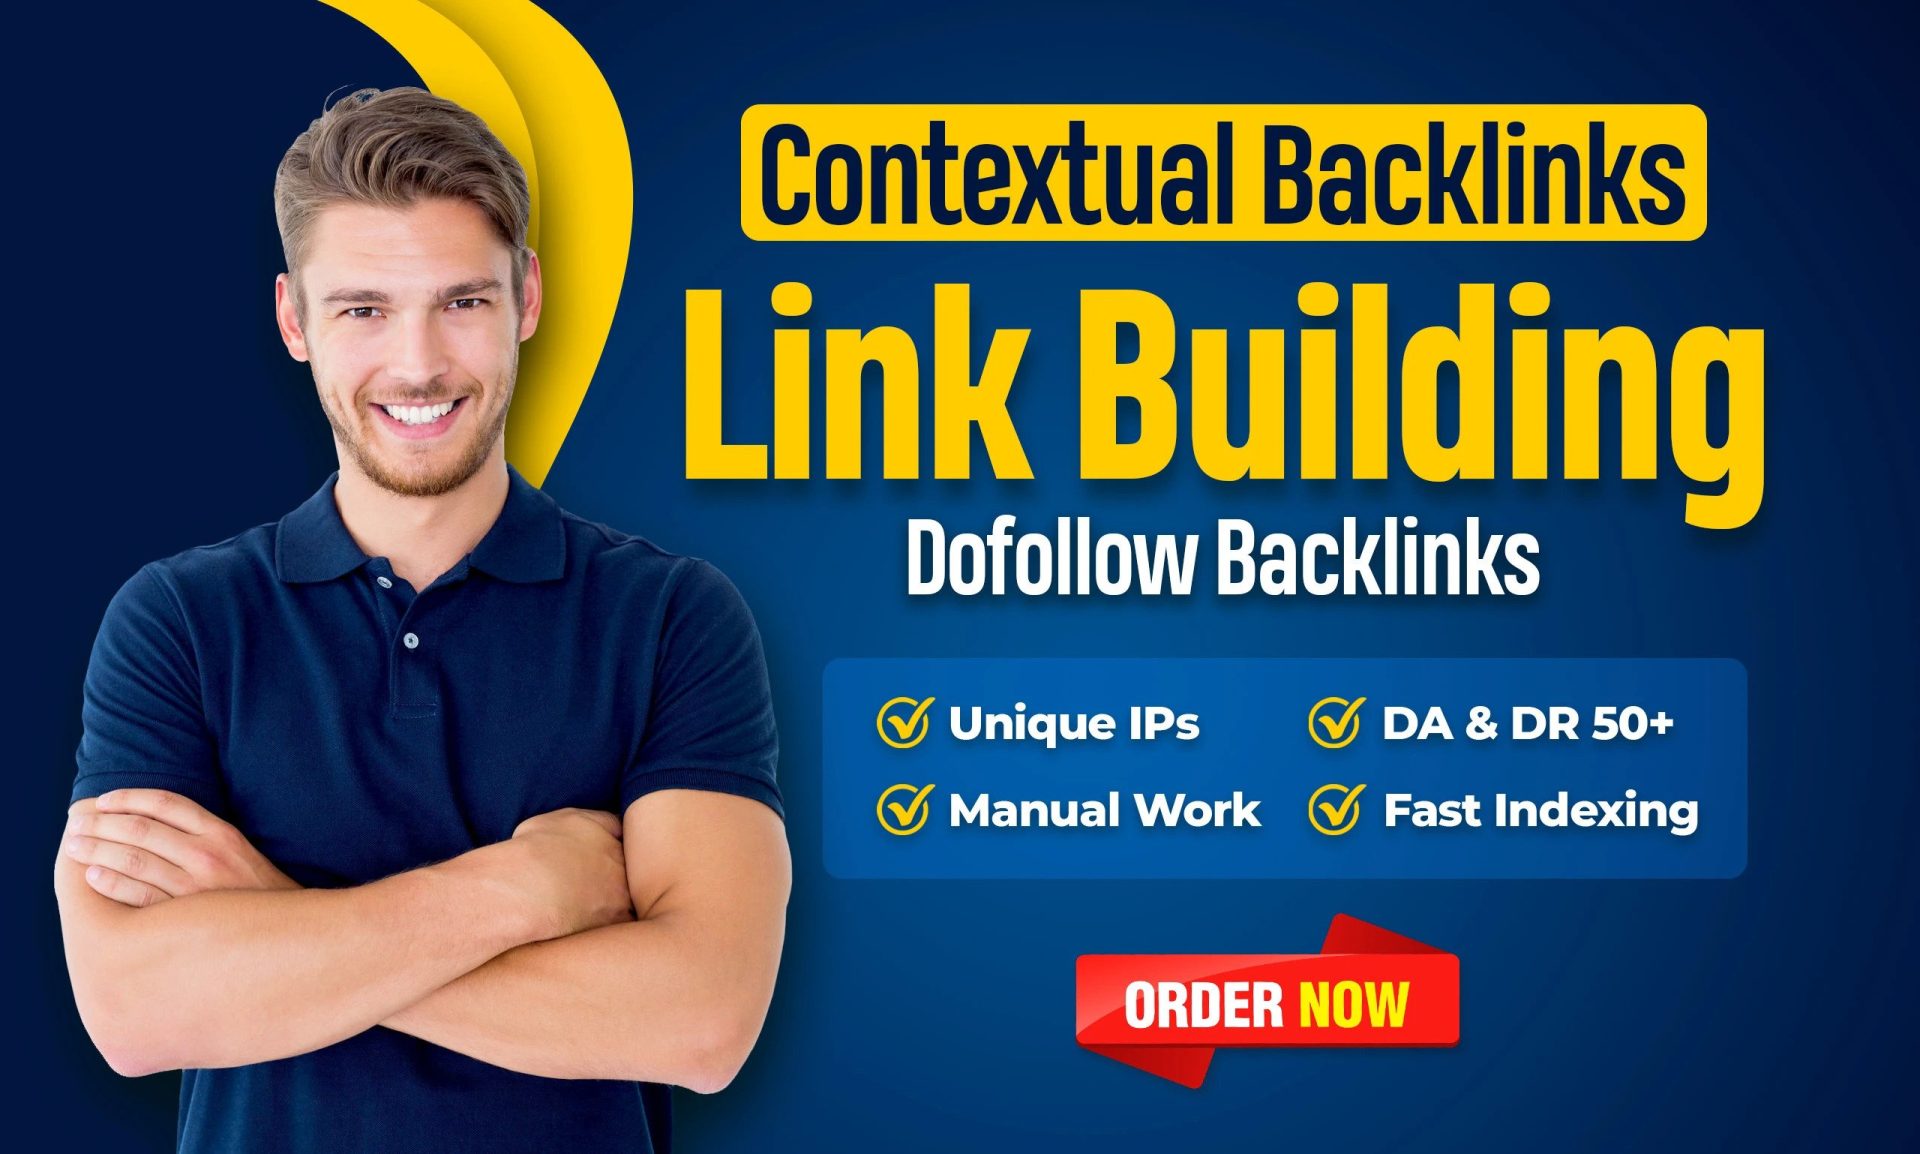 23901Link building 120 High-Quality SEO Dofollow Backlinks From Authority Websites